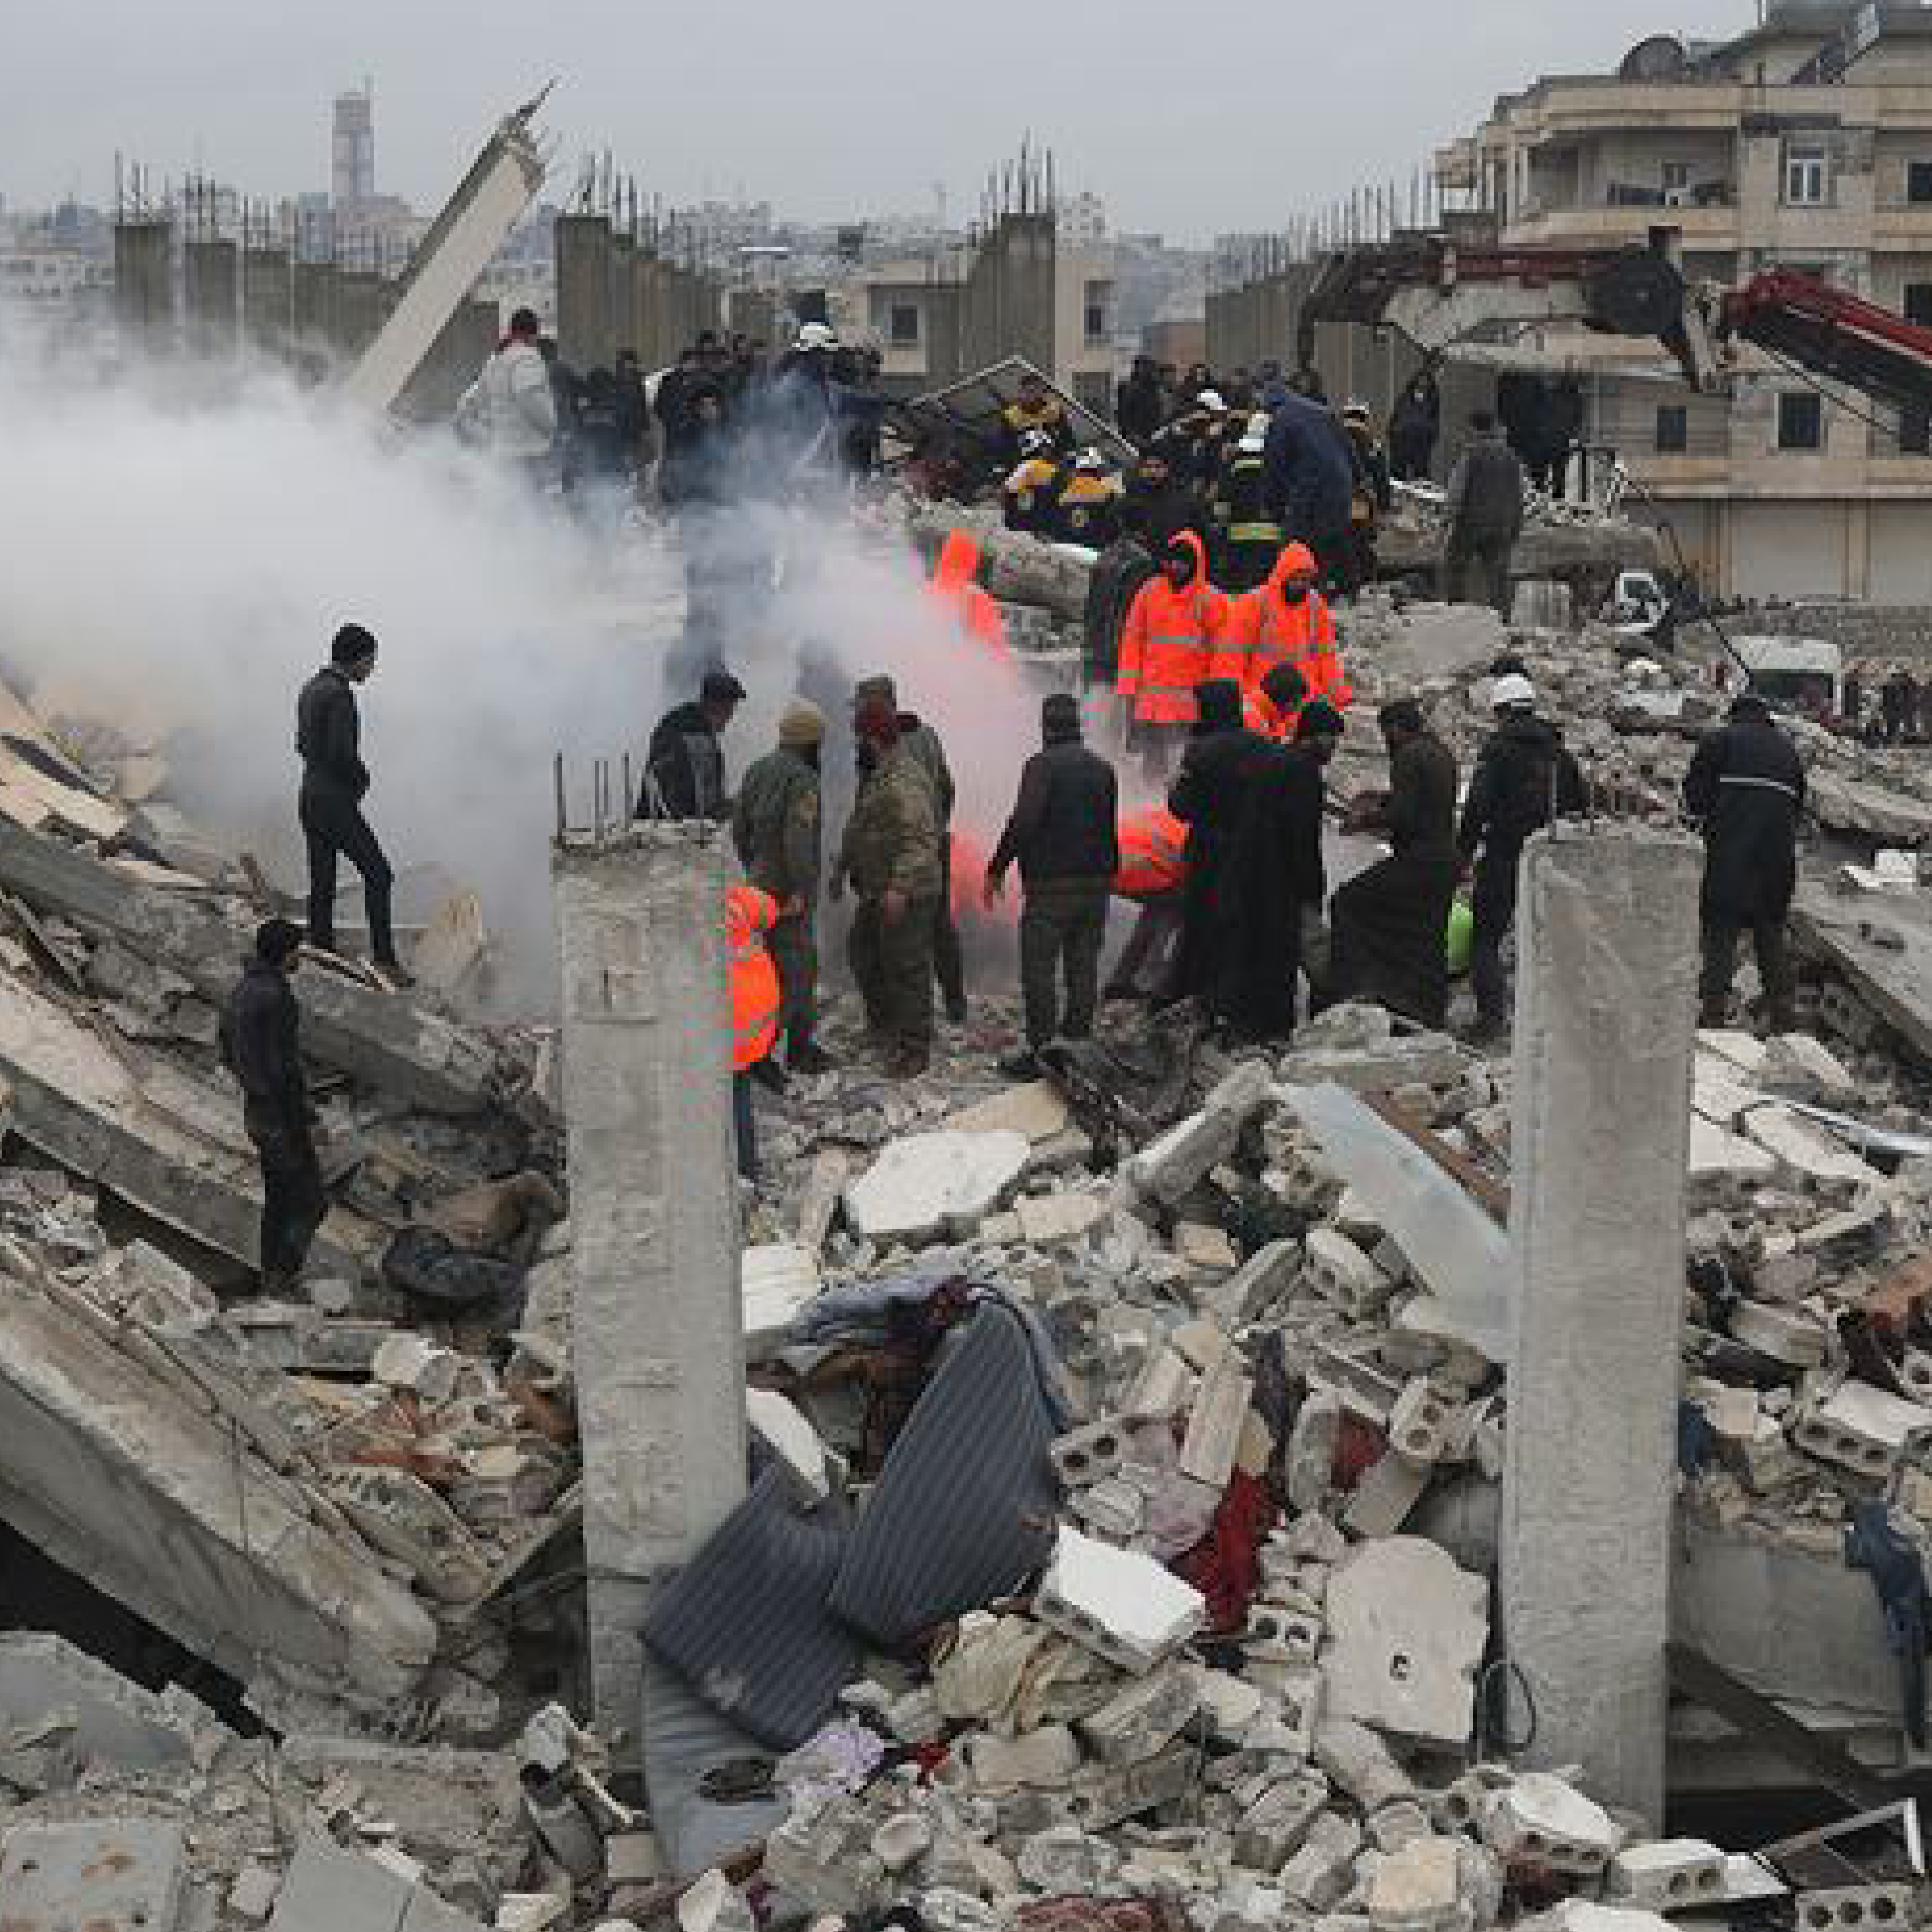 Rescue workers look for survivors in a building in Samada, Syria destroyed by the February 6 earthquake.